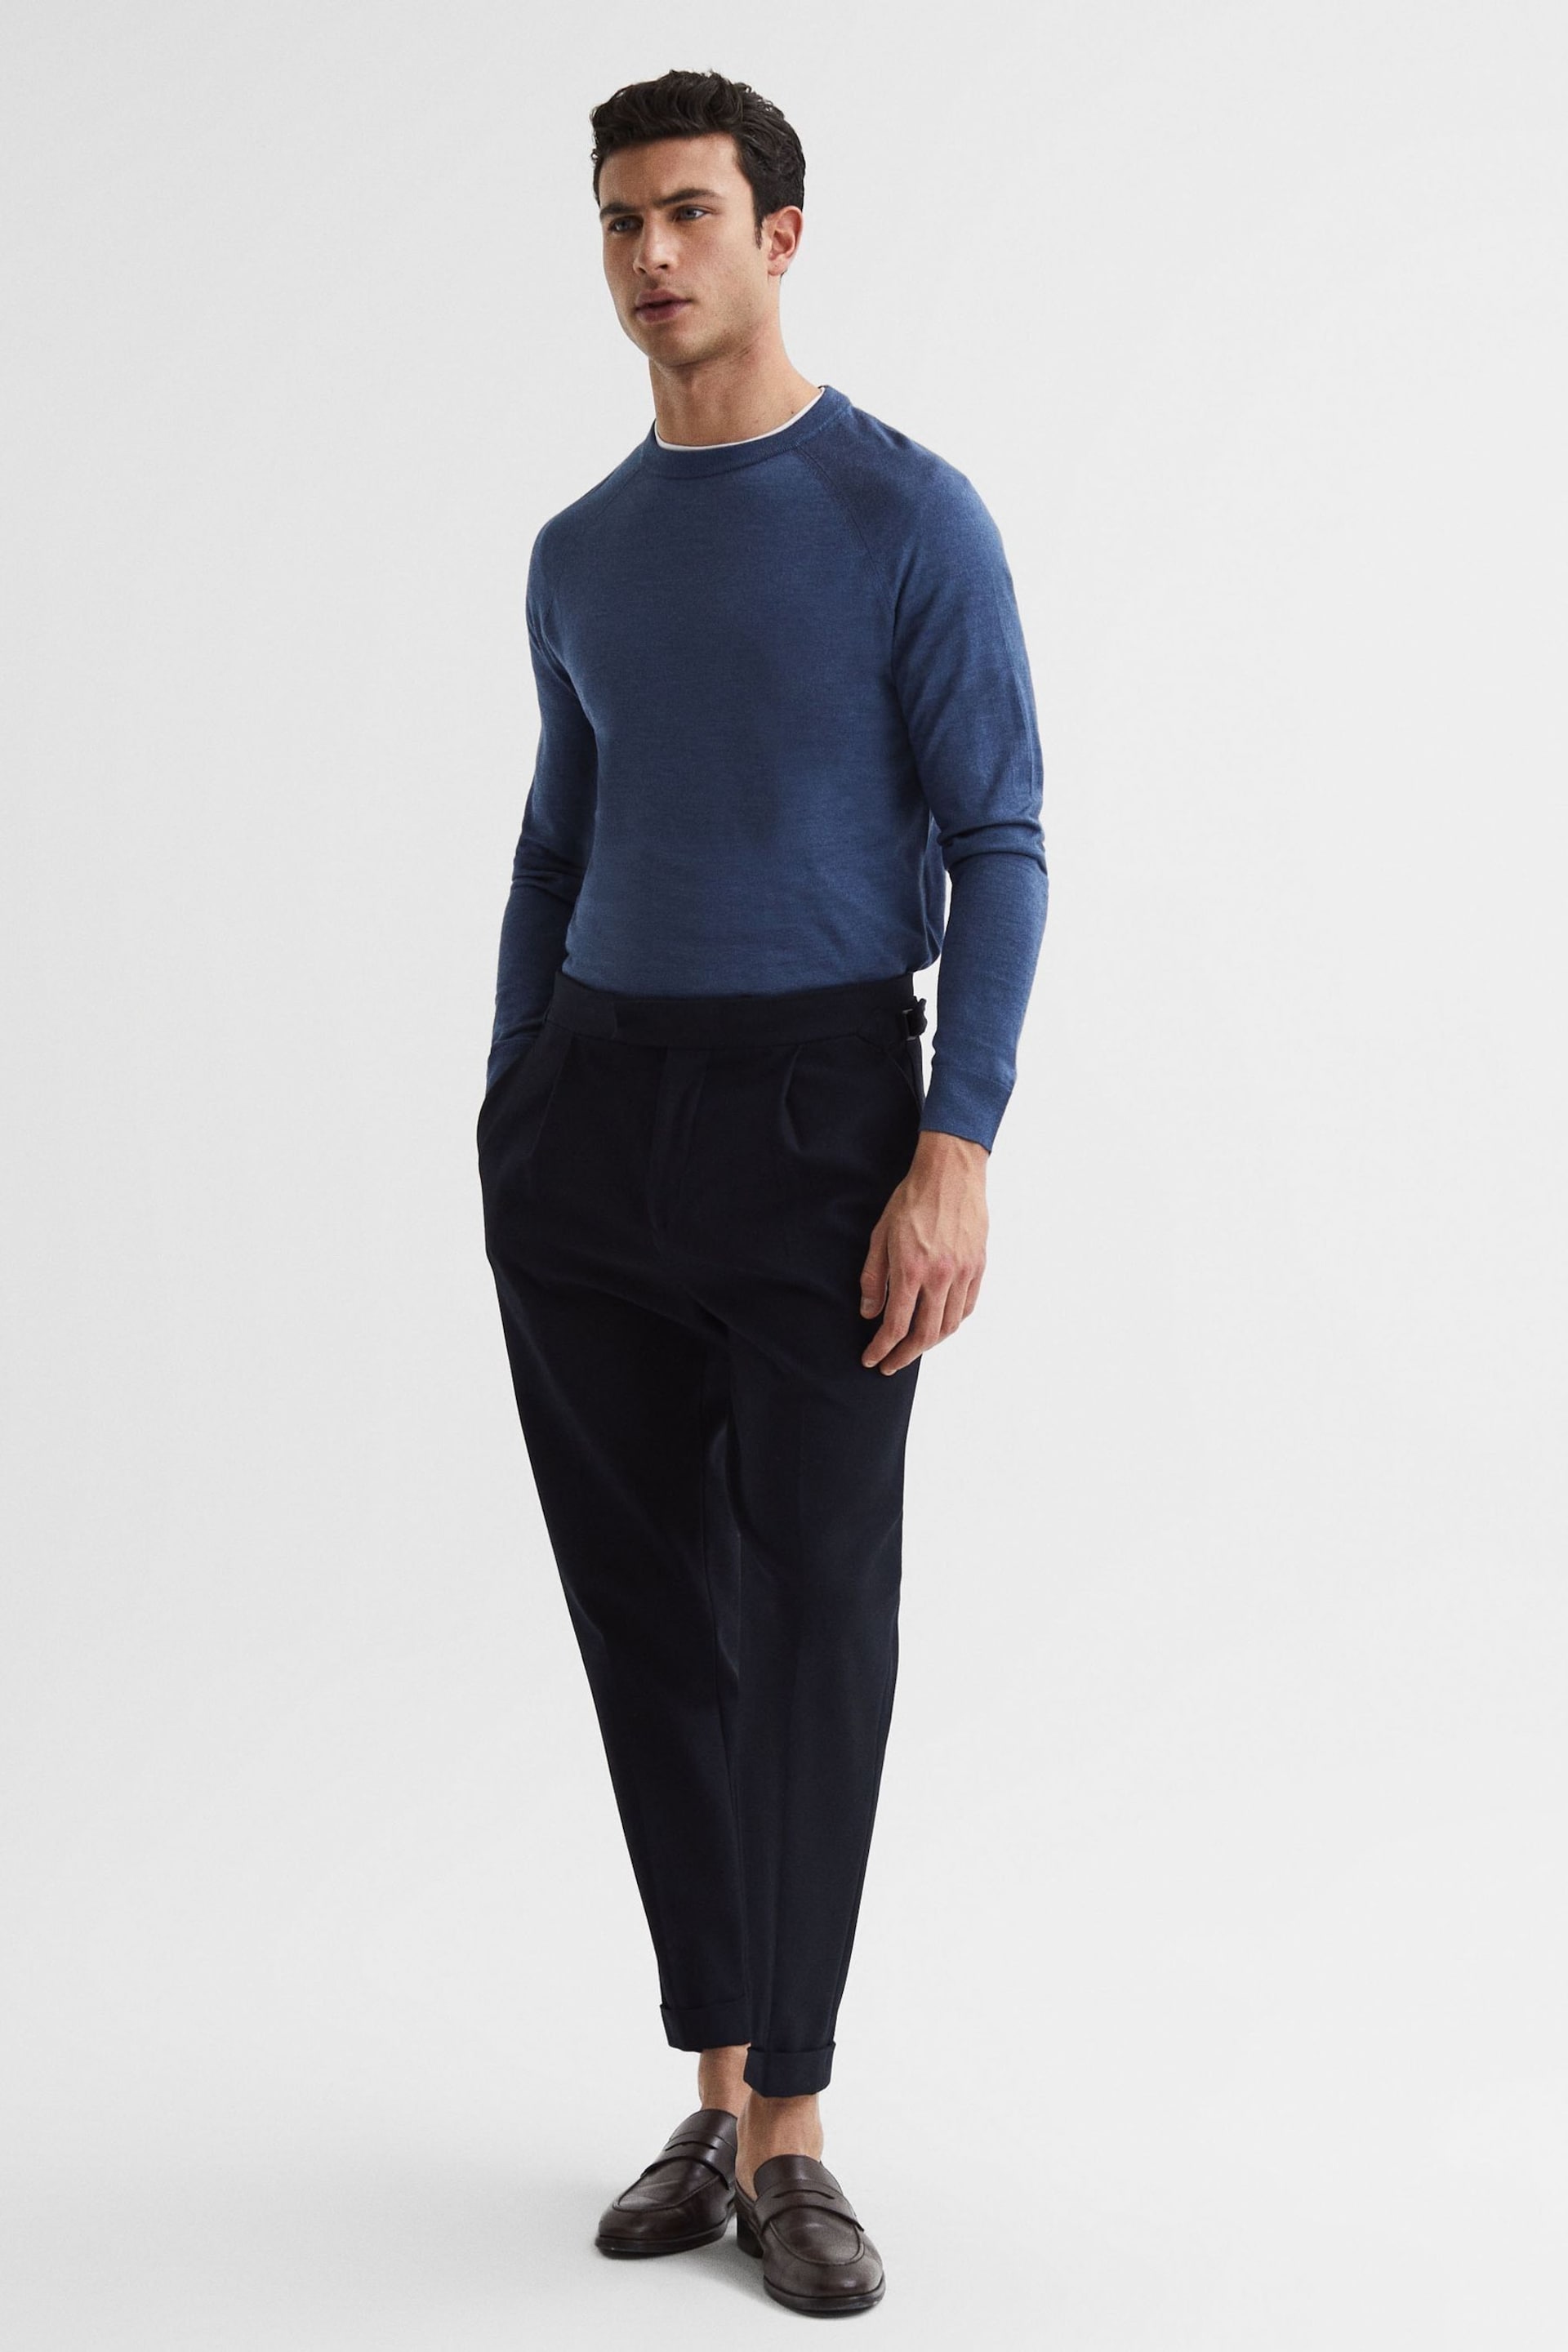 Reiss Airforce Blue Tinto Merino Silk Knitted Jumper - Image 3 of 6